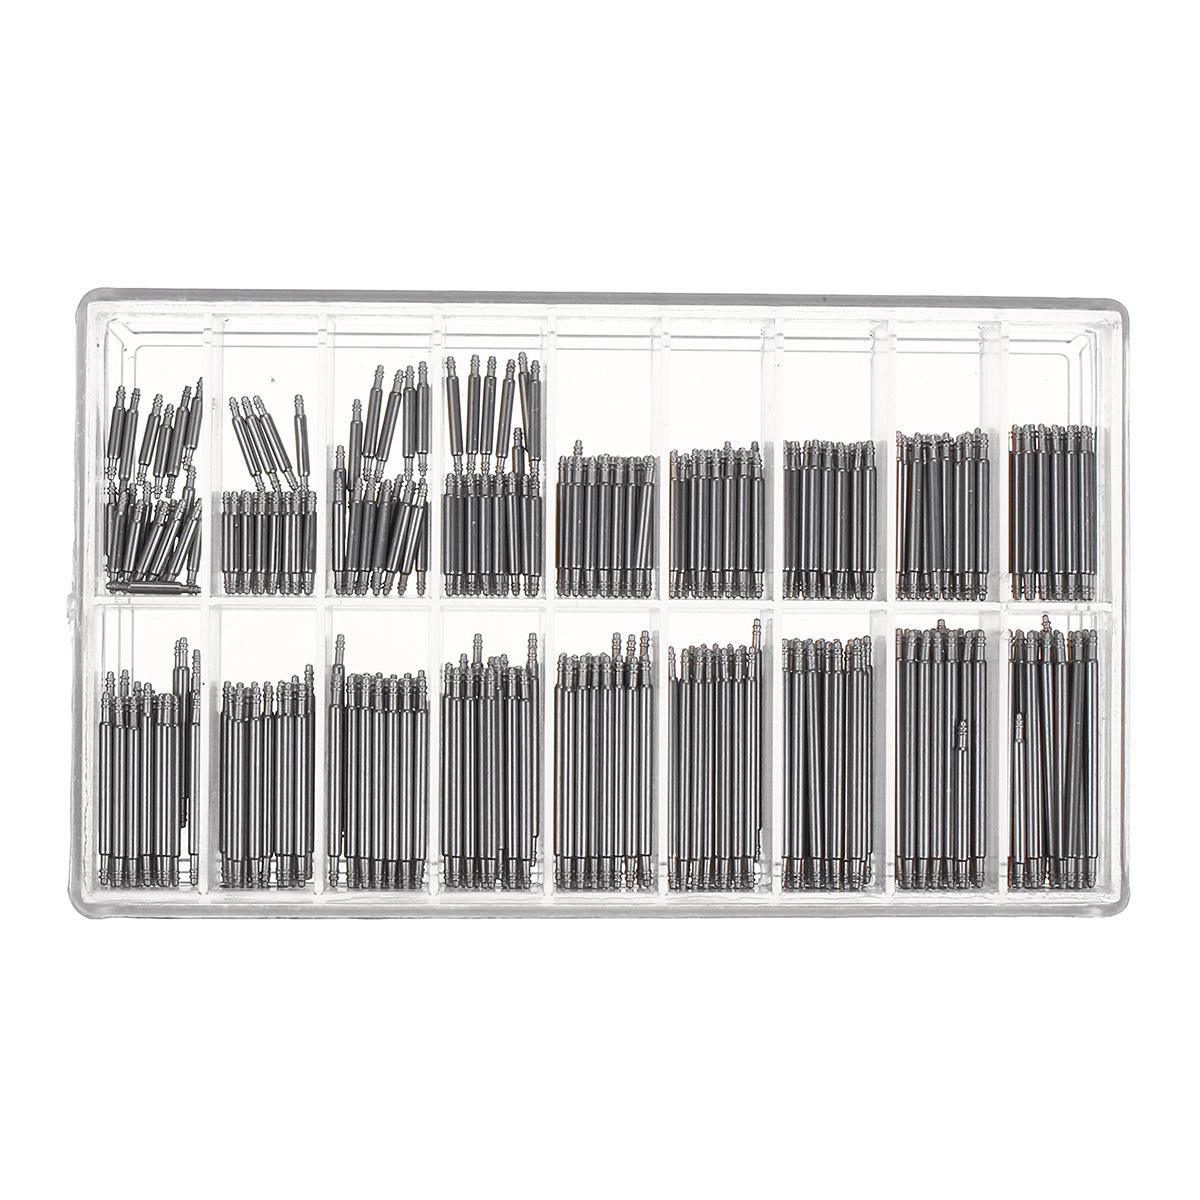 360Pcs Stainless Steel 8-25mm Watch Band Strap Spring Bars Link Pins Watch Repair Set